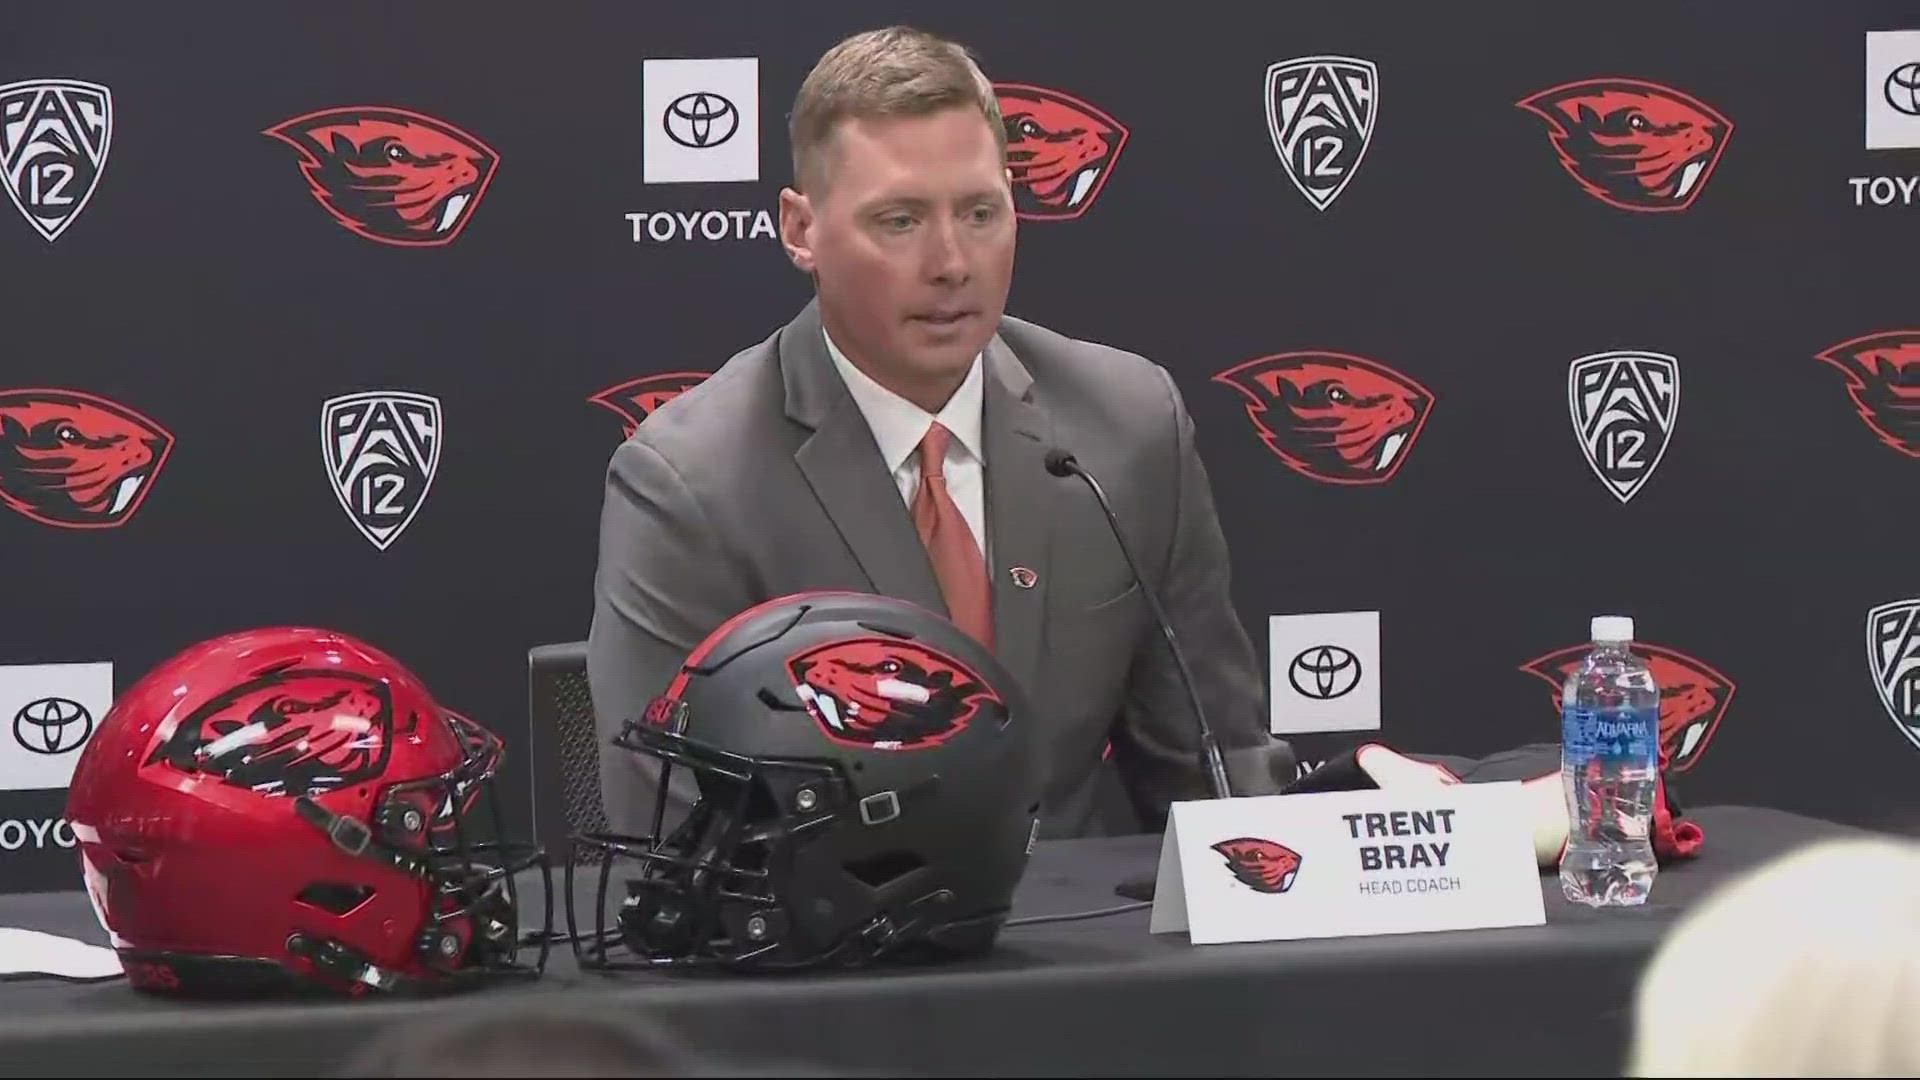 Trent Bray was officially introduced Wednesday as the Beavers' new head football coach after Jonathan Smith's departure.